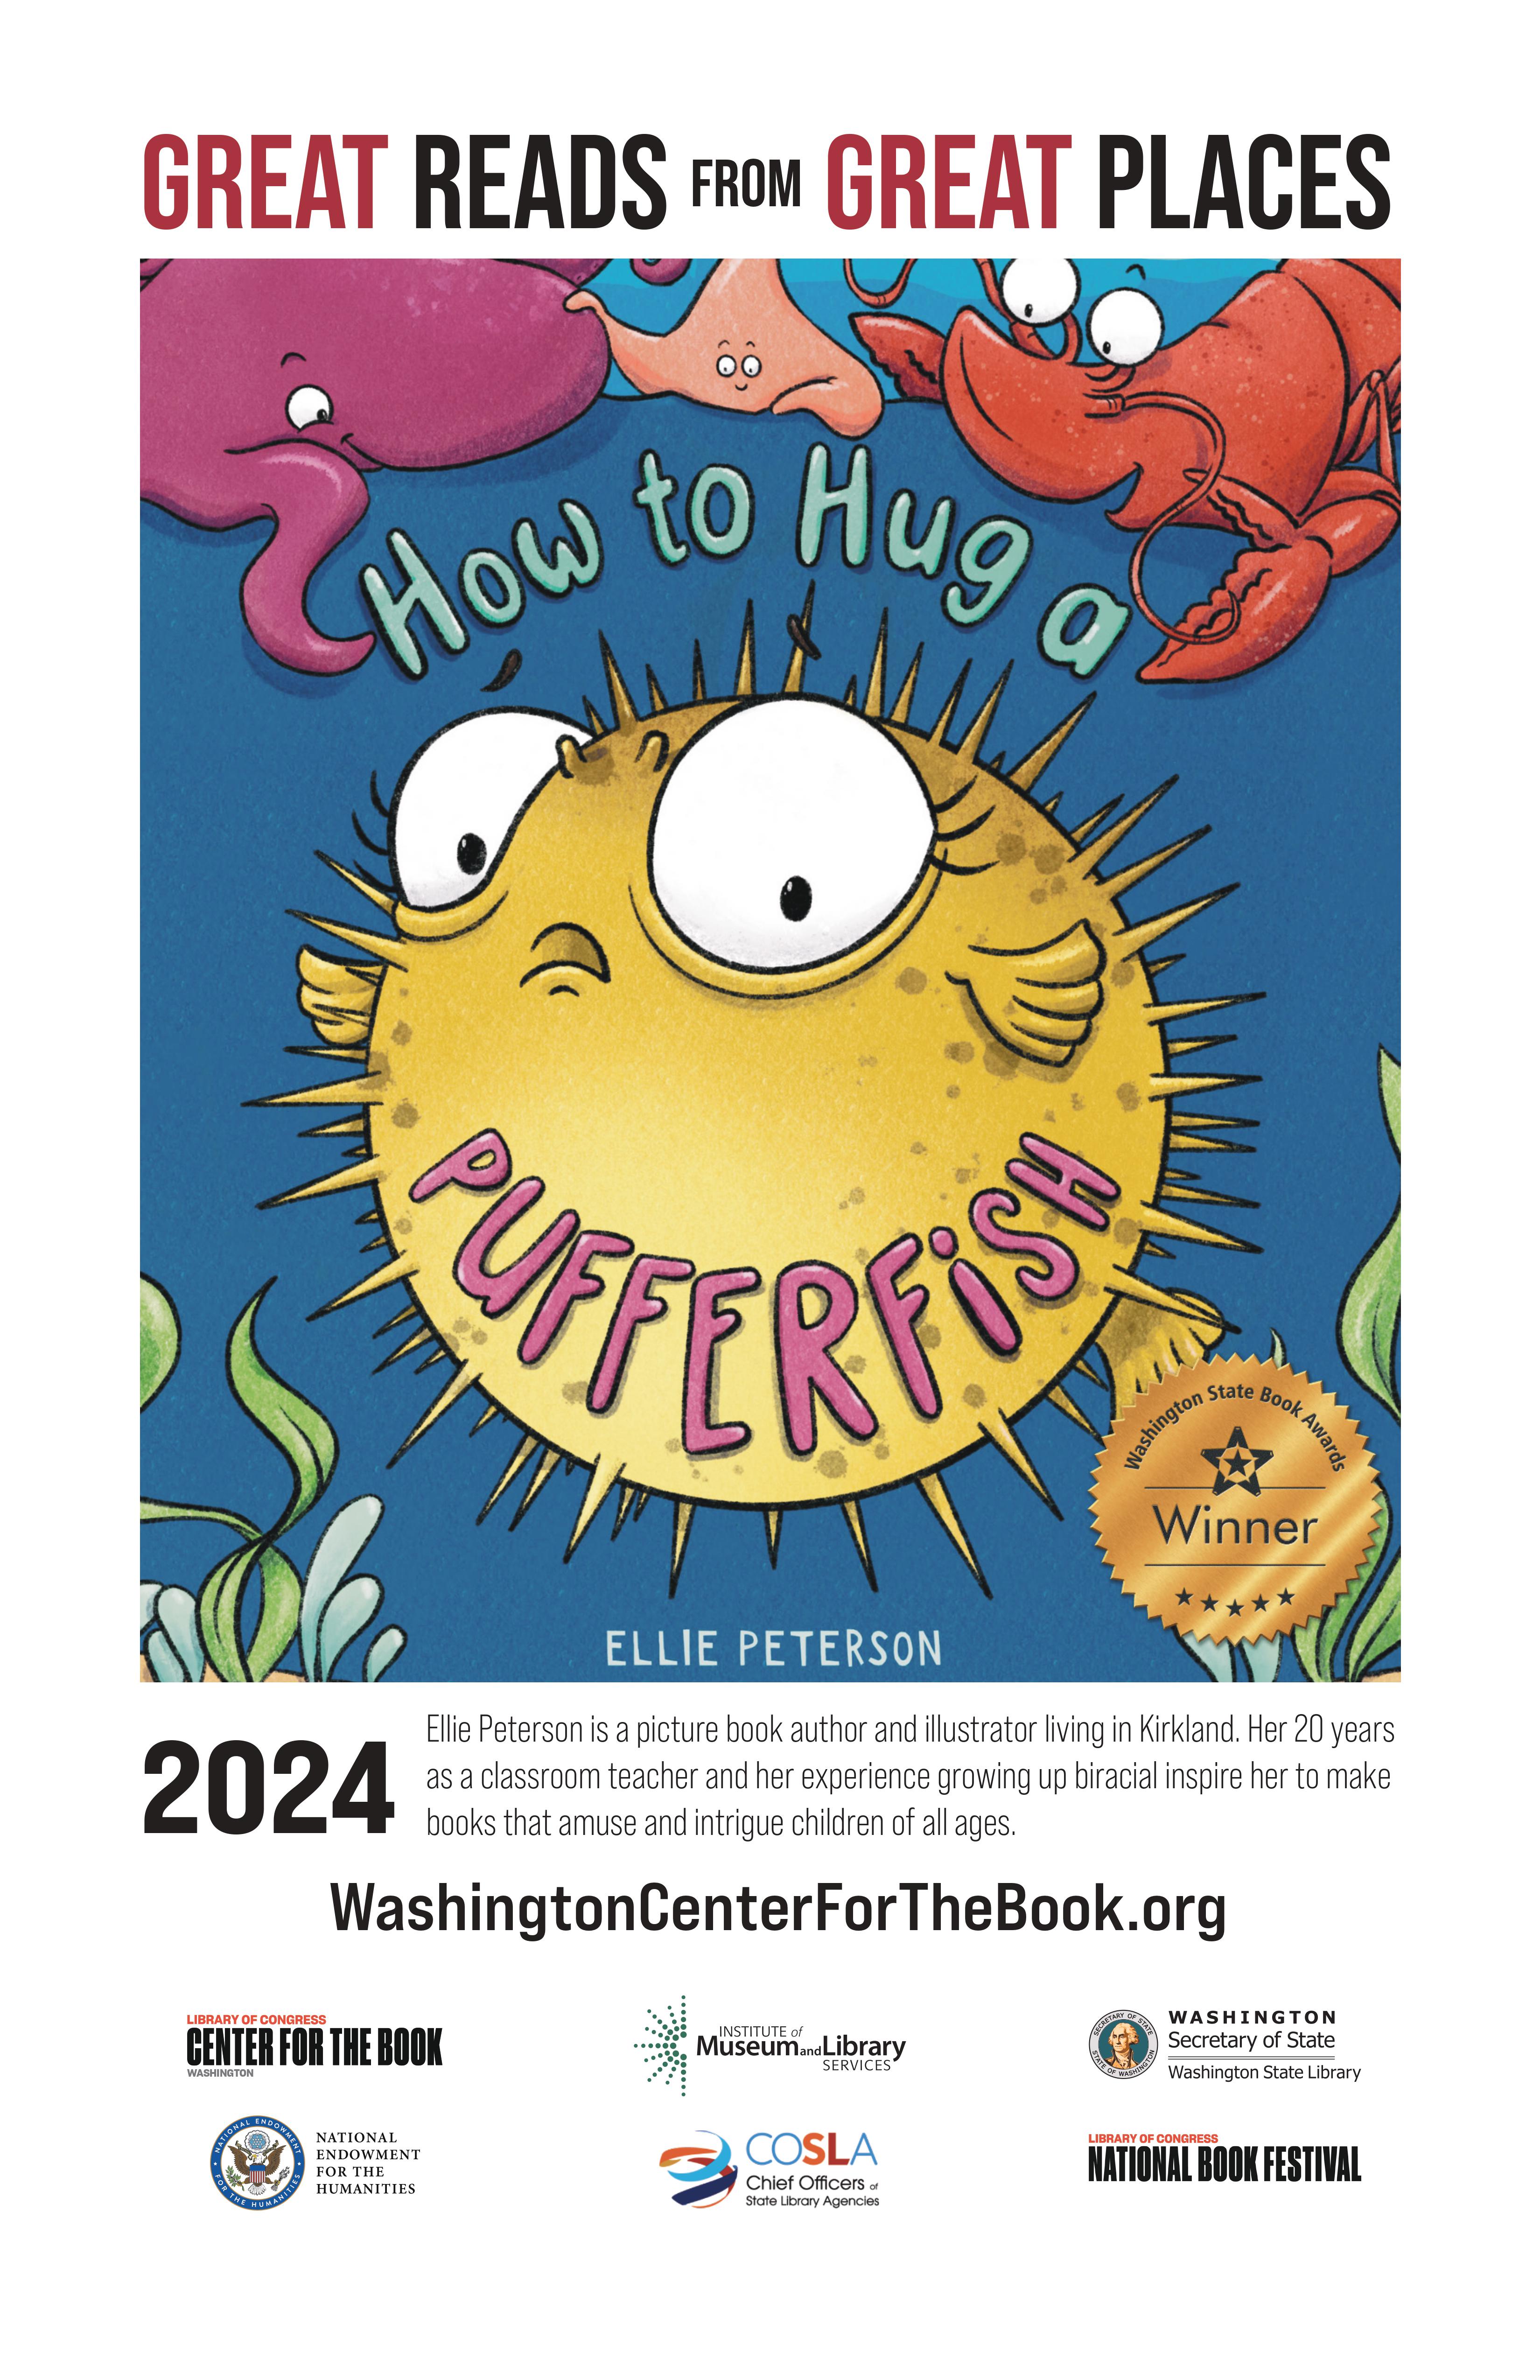 text reads: Great Reads from Great Places and features the book cover of Ellie Peterson's How to Hug a Pufferfish, a Washington State Book Award winner for picture books. Ellie Peterson is a picture book author and illustrator living in Kirkland. Her 20 years as a classroom teacher and her experience growing up biracial inspire her to make books that amuse and intrigue children of all ages. WashingtonCenterForTheBook.org. Logos are included for: the Washington Center for the Book, IMLS, Washington State Library, NEH, COSLA, and the Library of Congress National Book Festival.